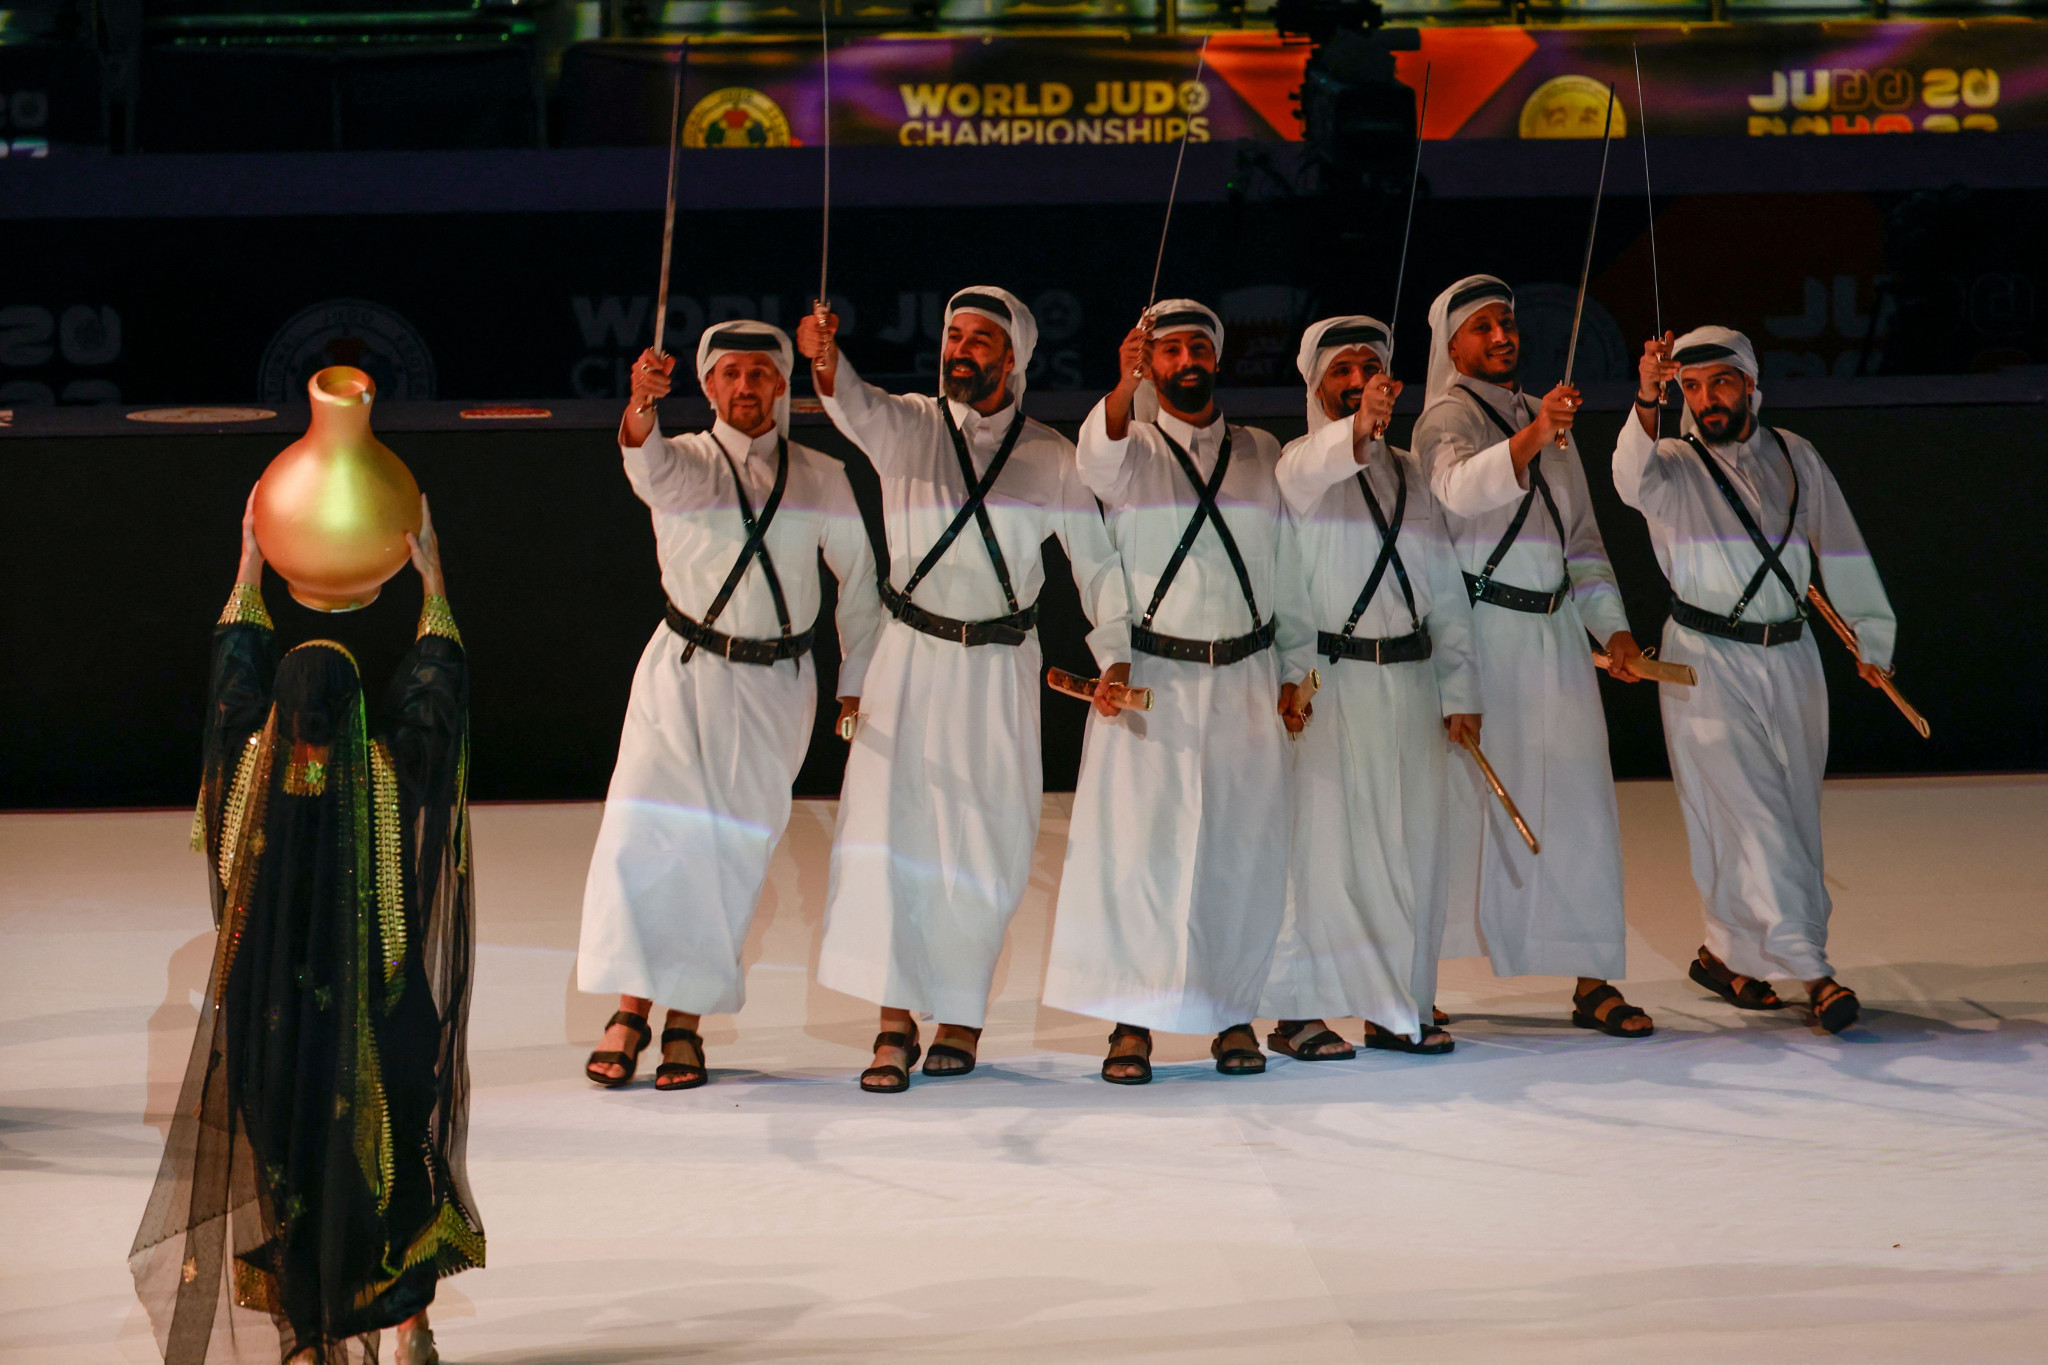 Doha dancers dazzle at Opening Ceremony as Abe family celebrate two more golds